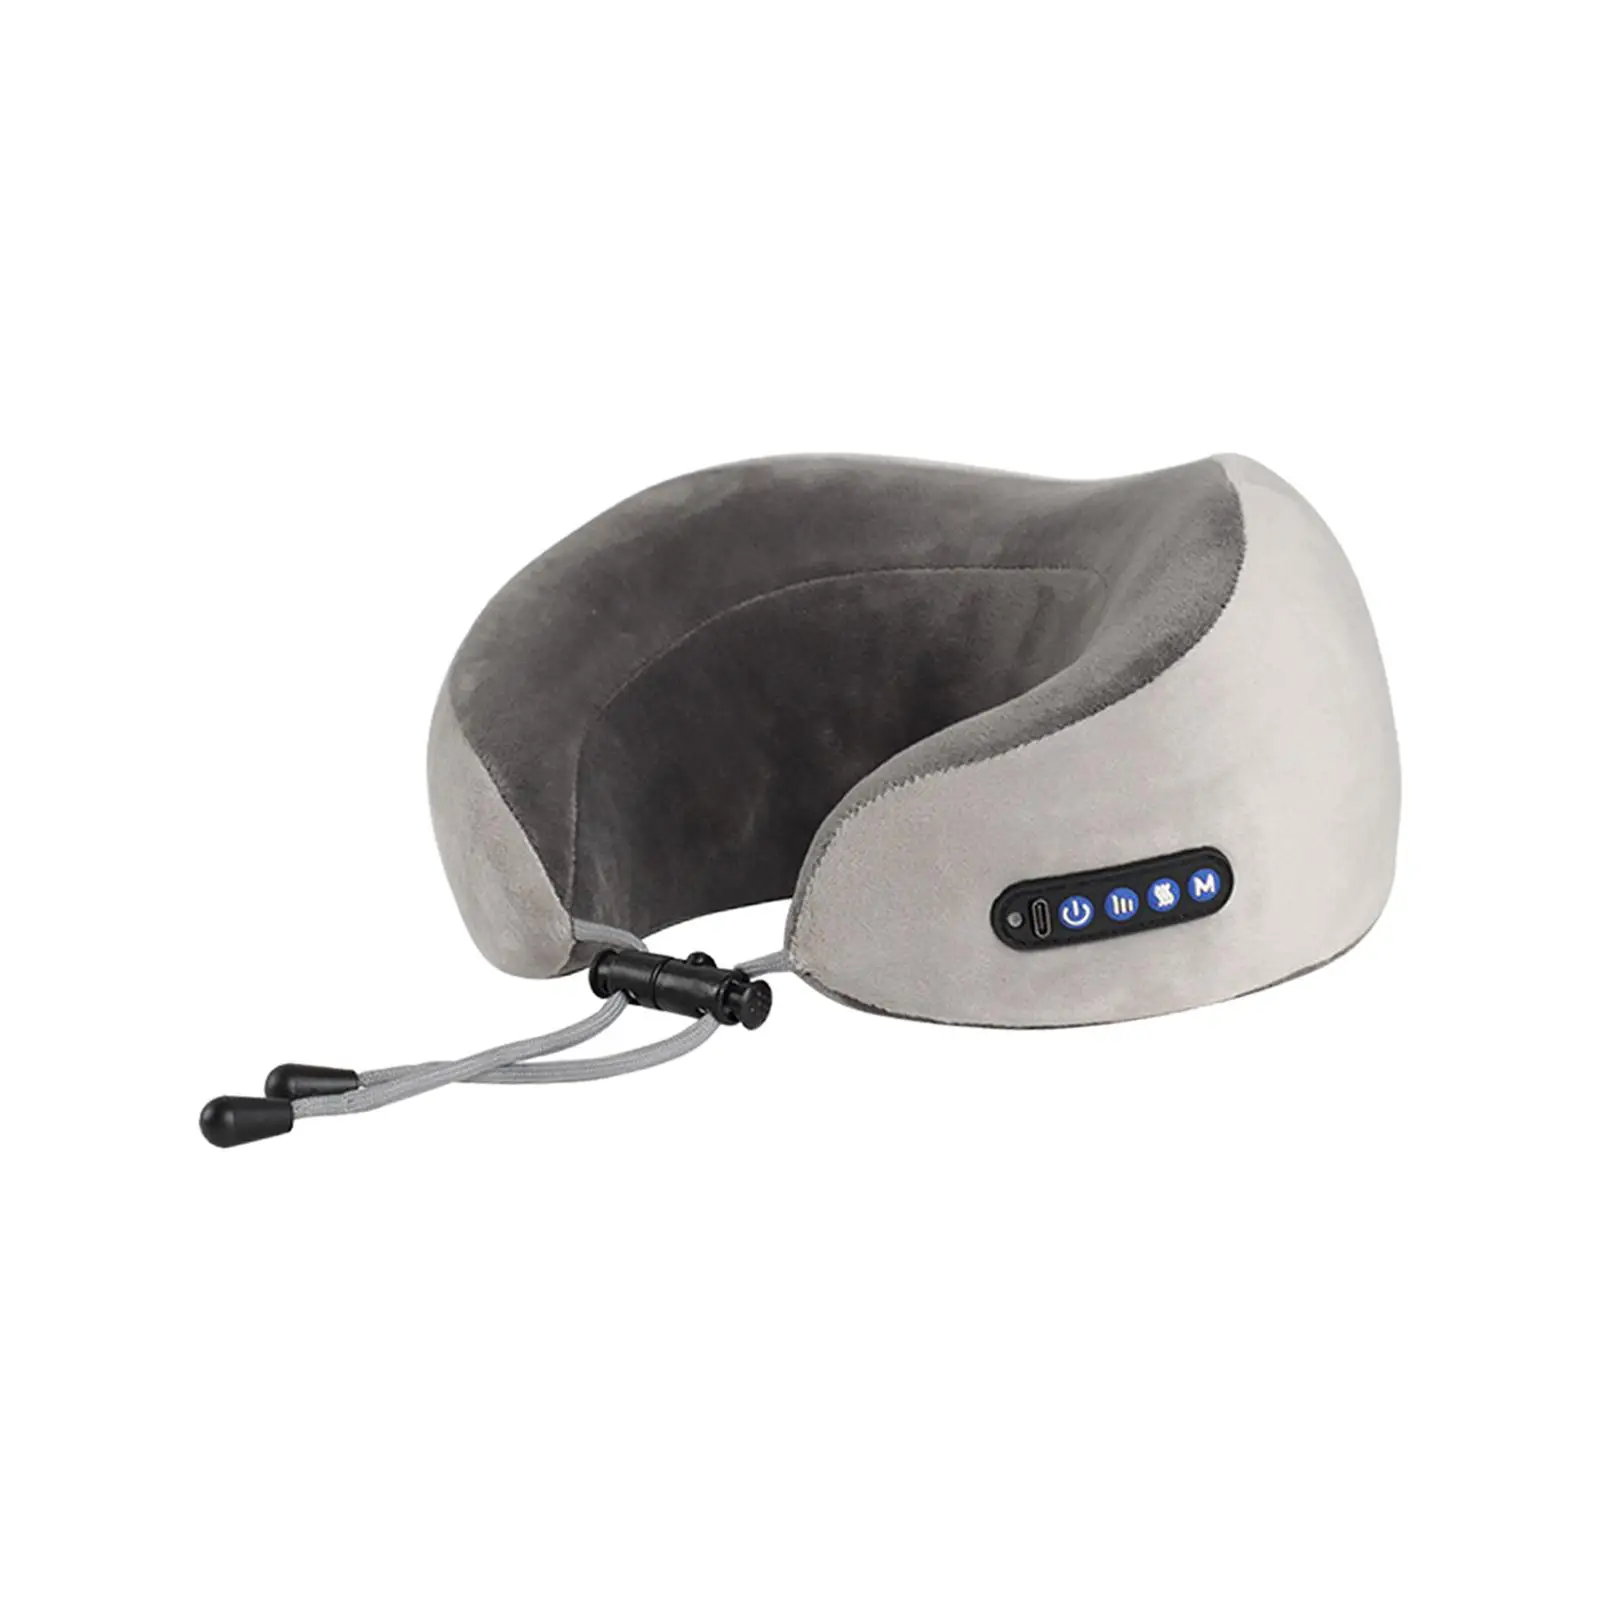 Cervical Neck Massager Pillow Multifunction Portable Adjustable Kneading Vibration U style Travel Pillow for Cars Watching TV